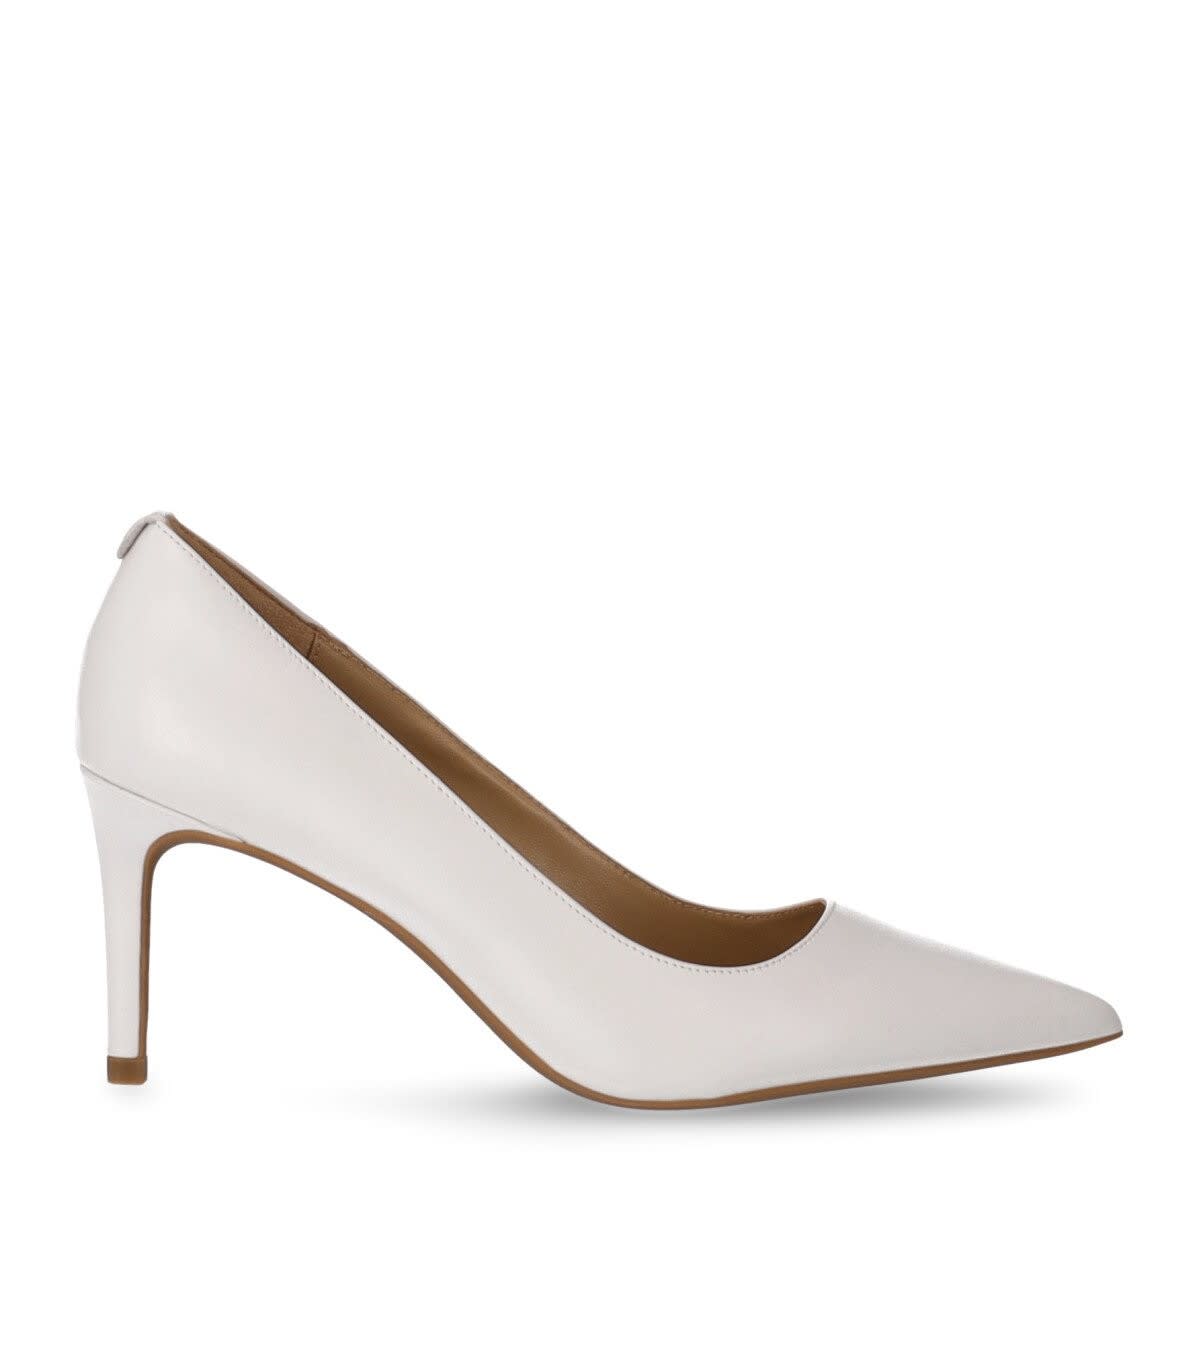 MICHAEL KORS ALINA PUMPS IN WHITE LEATHER